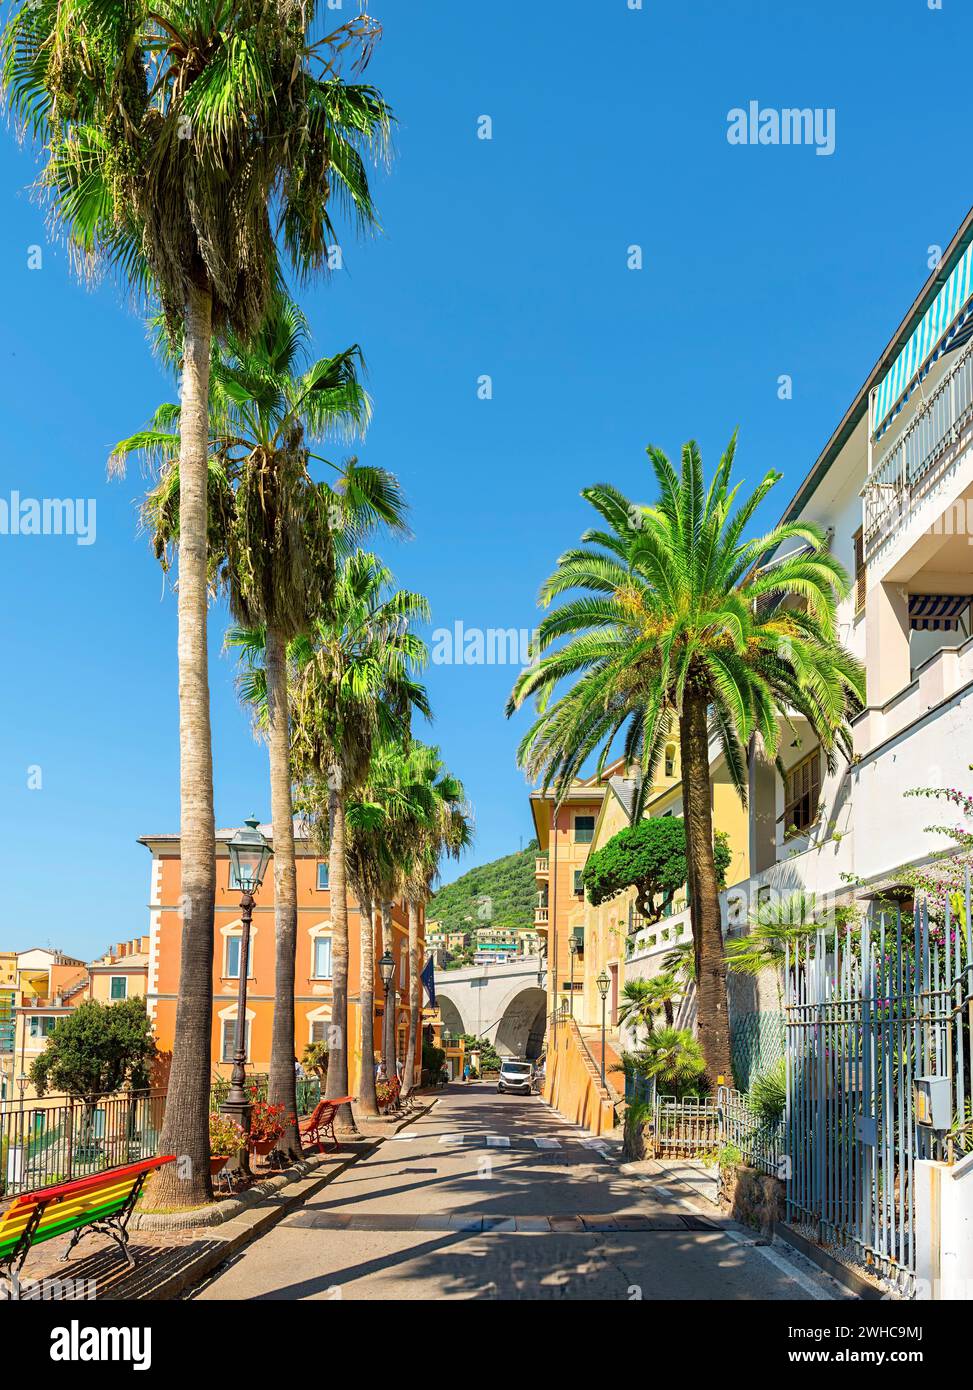 Road with palm trees in the city of Bogliasco in southern, Italy Stock Photo